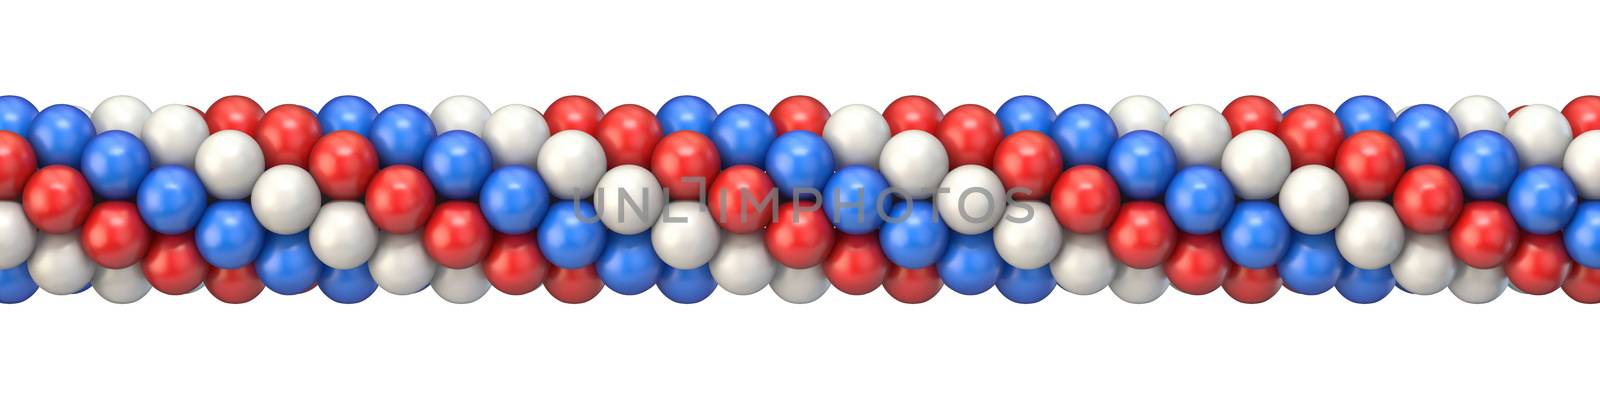 White, red and blue balloons decoration 3D rendering illustration isolated on white background